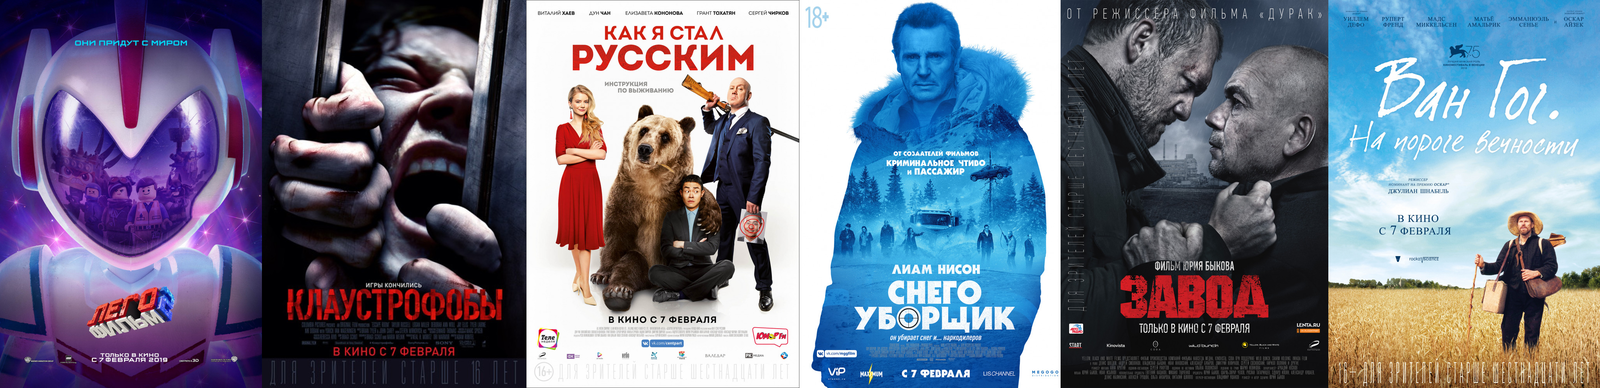 Russian box office receipts and distribution of screenings over the past weekend (February 7 - 10) - Movies, Box office fees, Film distribution, Lego movie, Claustrophobia, Factory, 